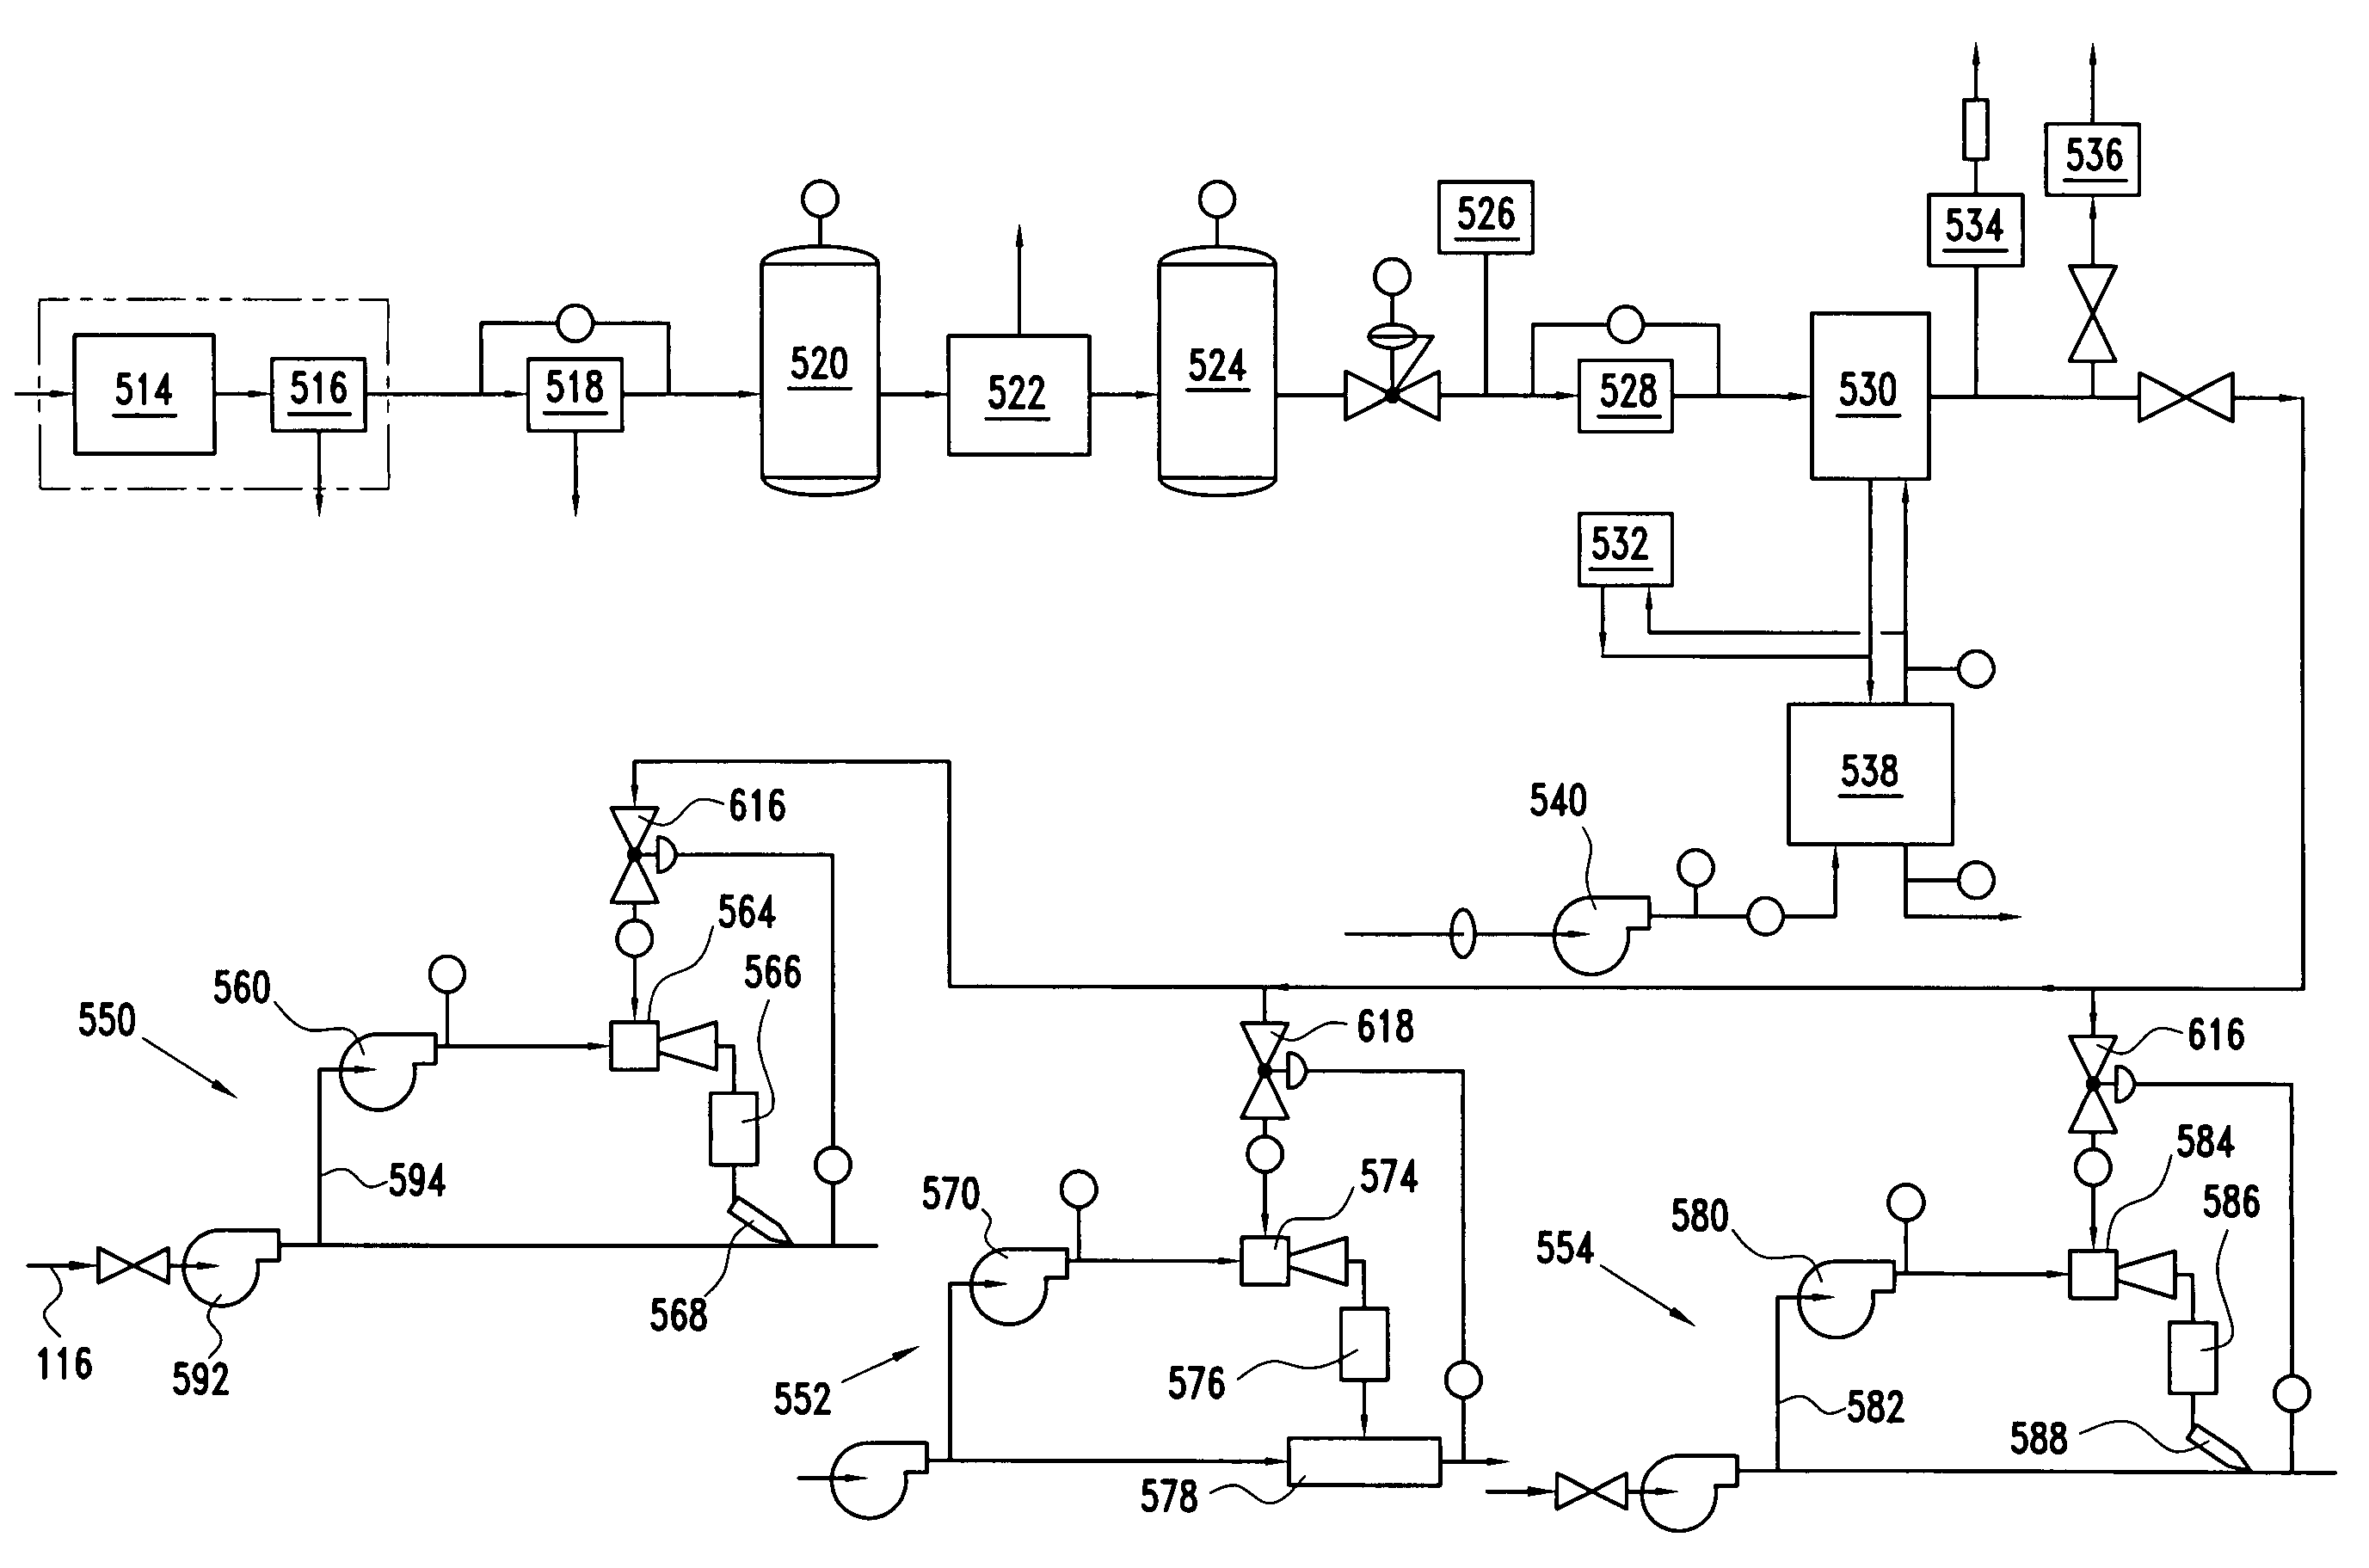 Ballast water treatment system and method without off-gas